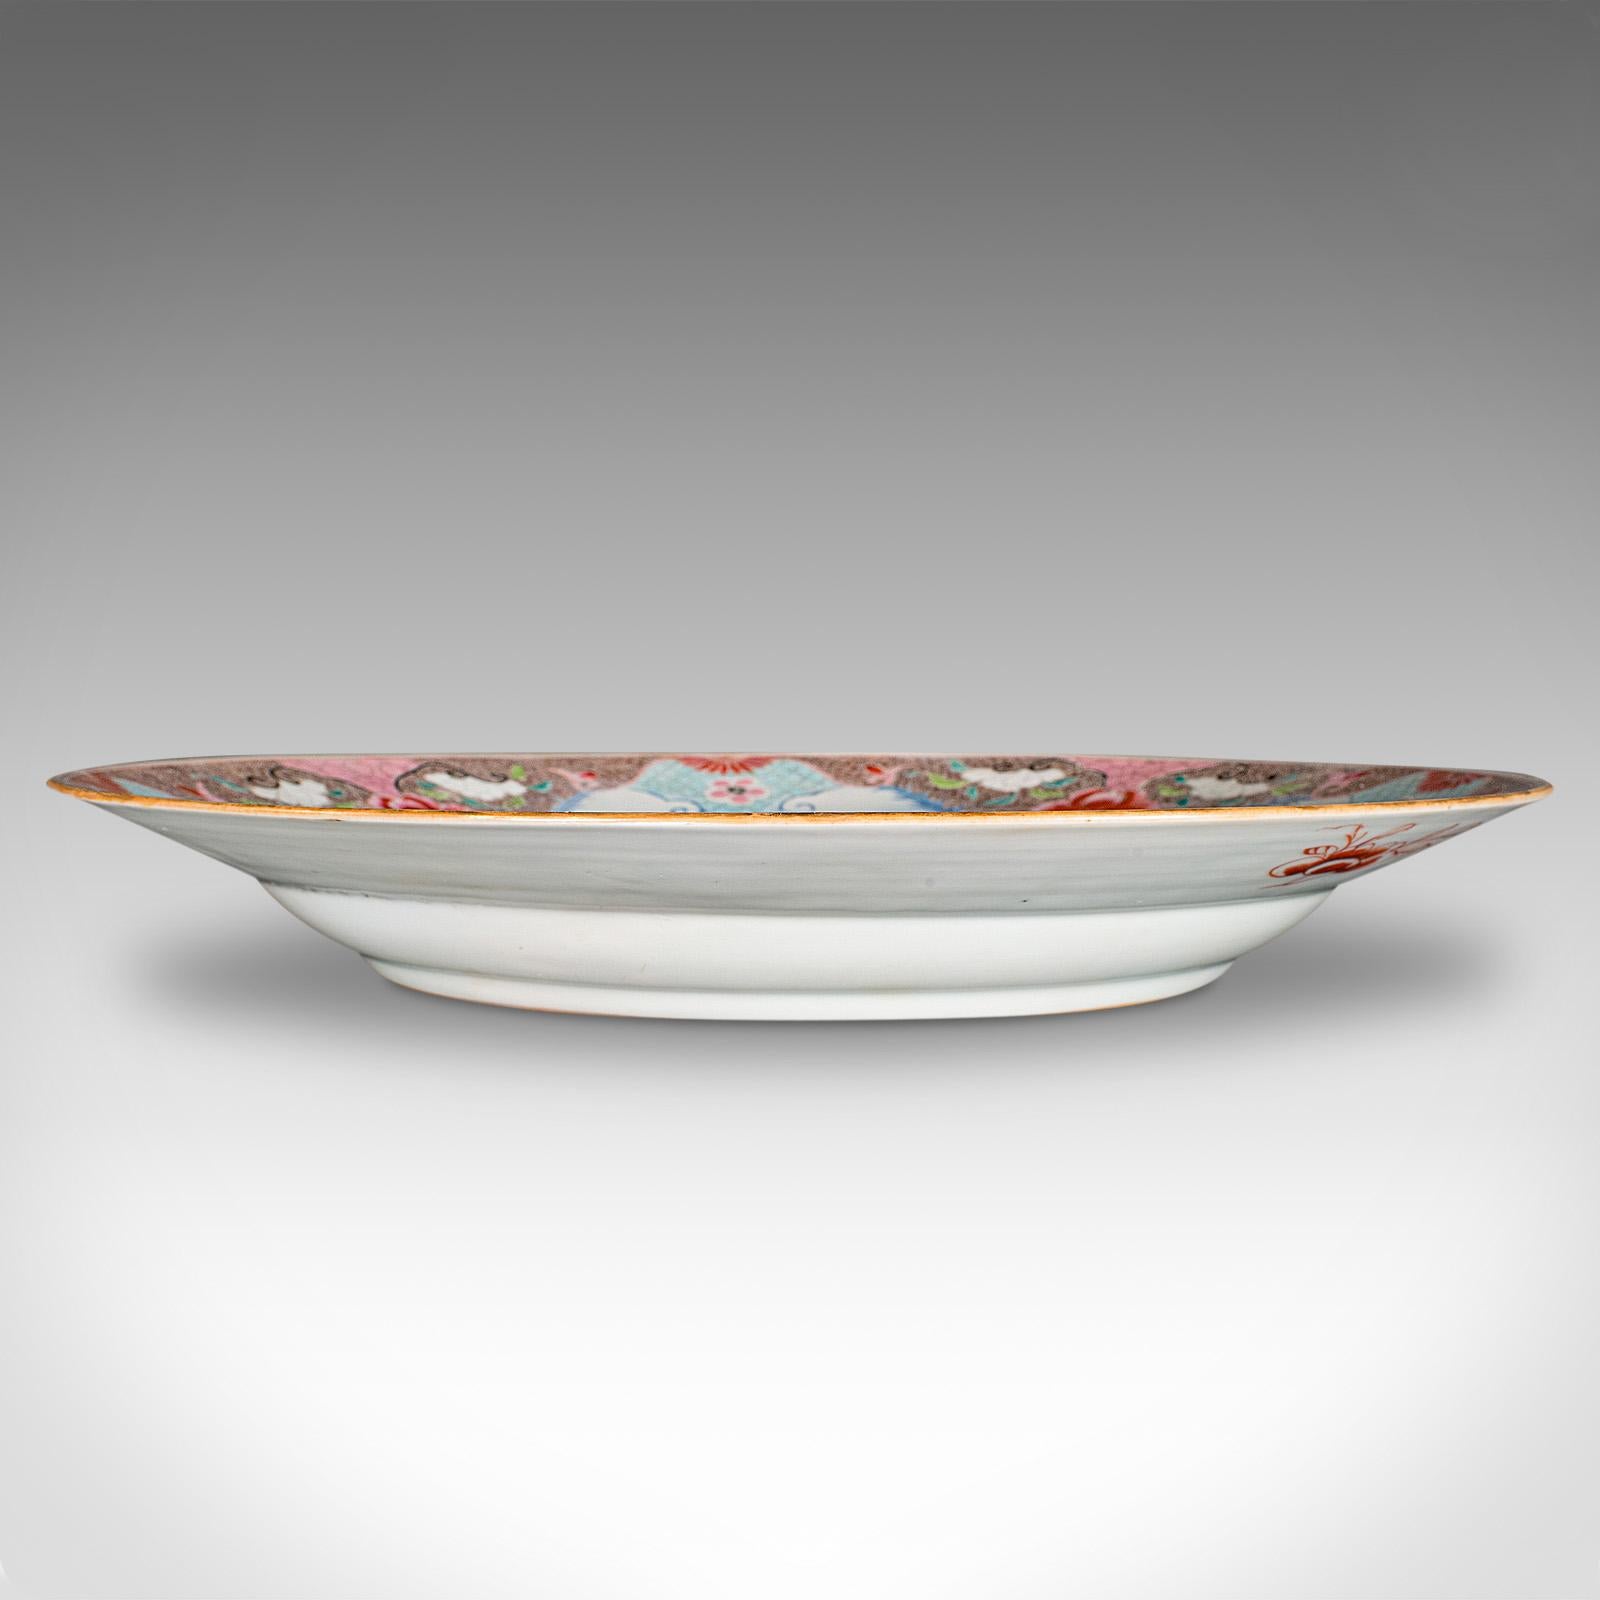 Large Antique Decorative Charger, Japanese, Ceramic, Serving Plate, Circa 1920 For Sale 2